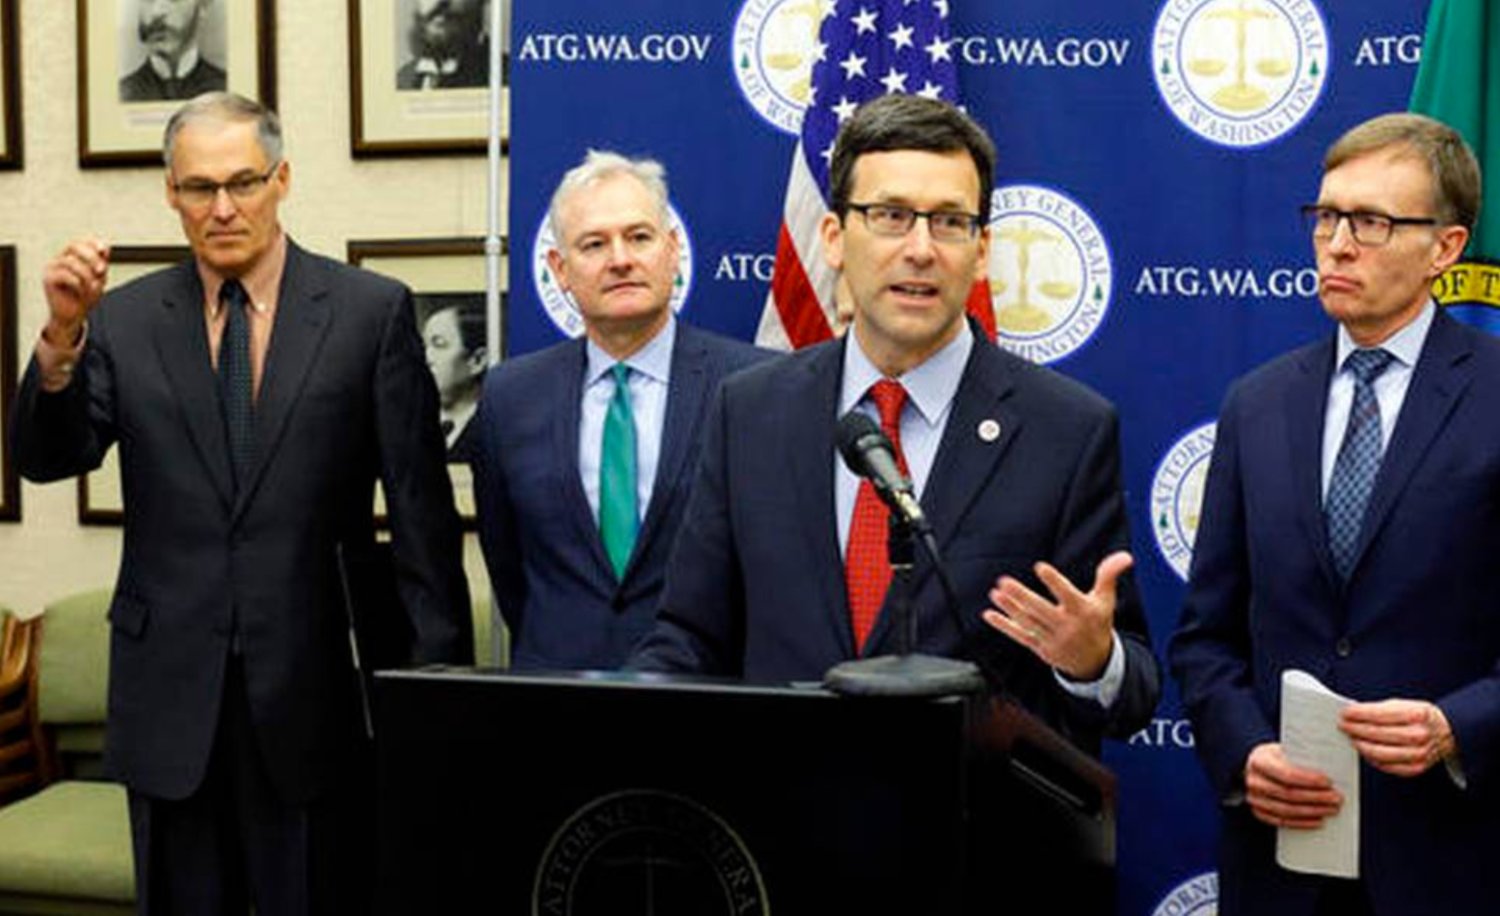 Attorney General Bob Ferguson, second from right, speaks Monday, Jan. 16, 2017, during a news conference at the Capitol in Olympia, Wash. to announce that he and Washington Gov. Jay Inslee, left, have proposed legislation to abolish the death penalty in Washington state.